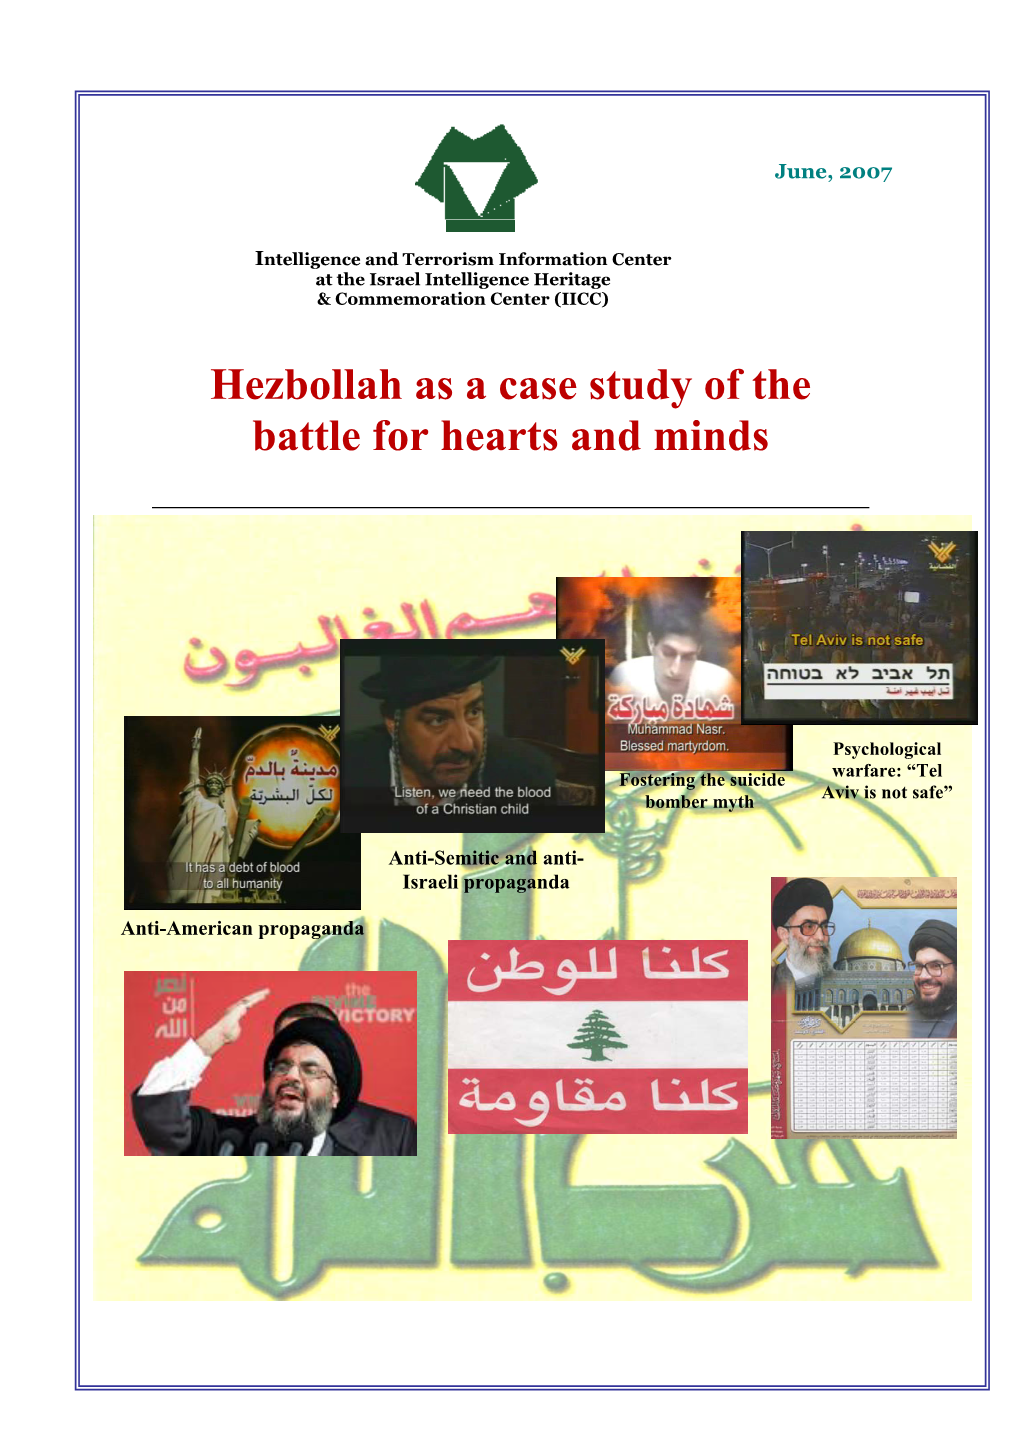 Hezbollah As a Case Study of the Battle for Hearts and Minds